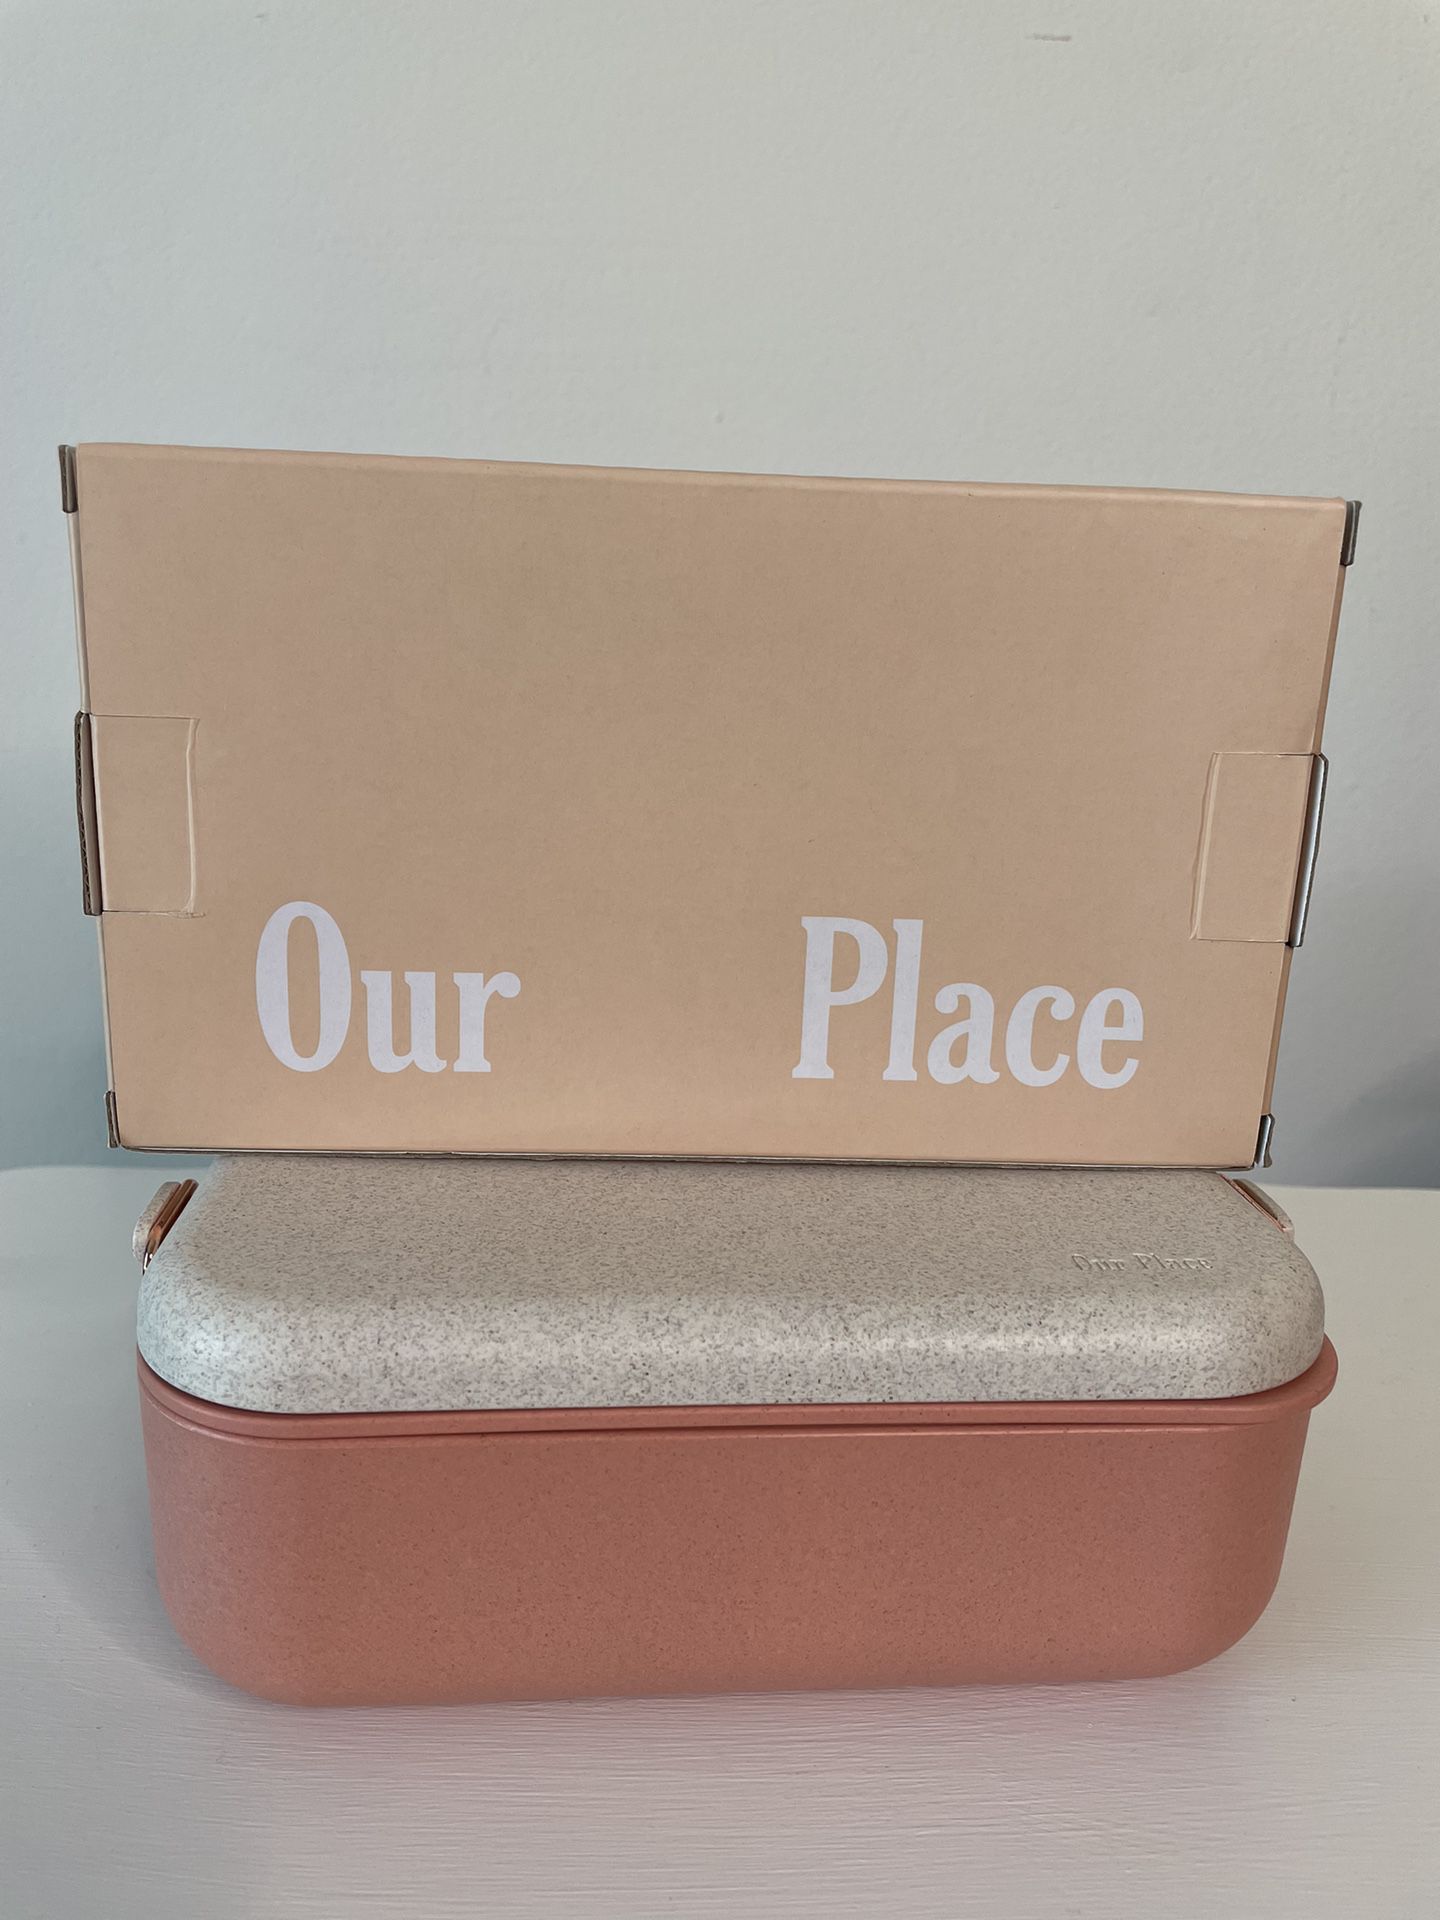 New- Our Place Bento Box - Pink Lunchbox With Utensils  - Chopsticks - Sustainably Made